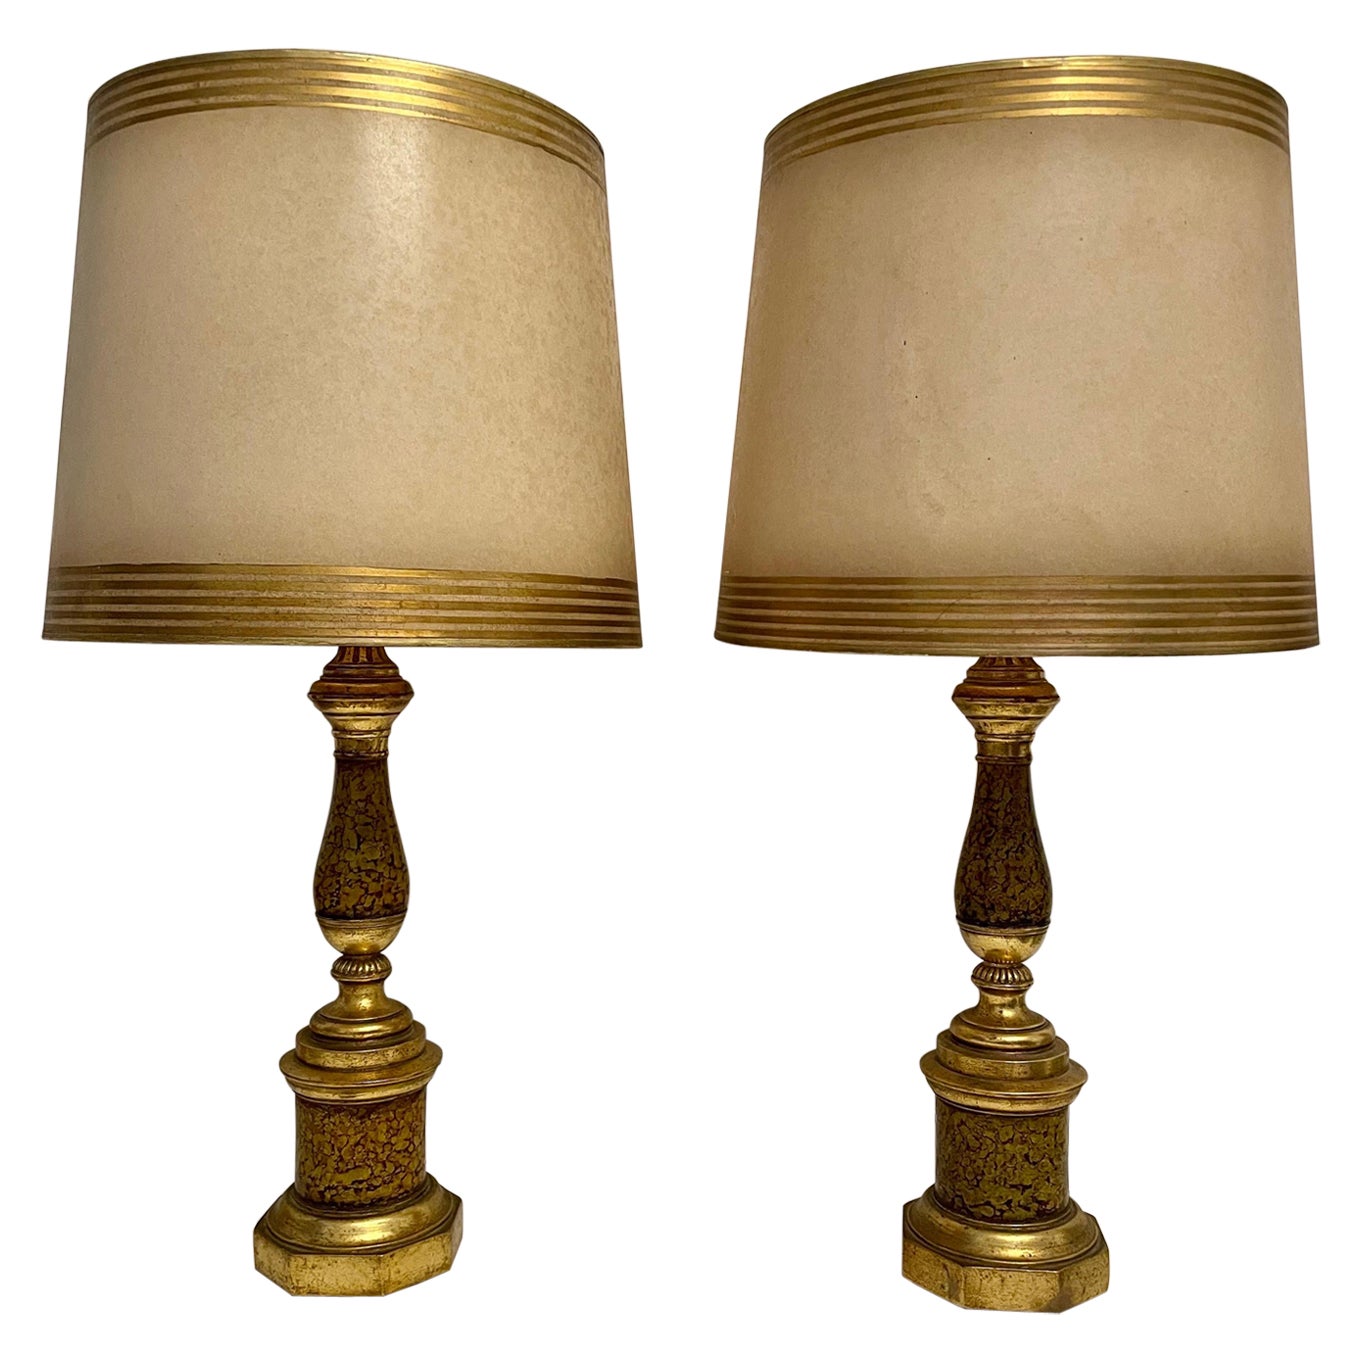 Pair Of Painted and Gilt Borghese Table Lamps